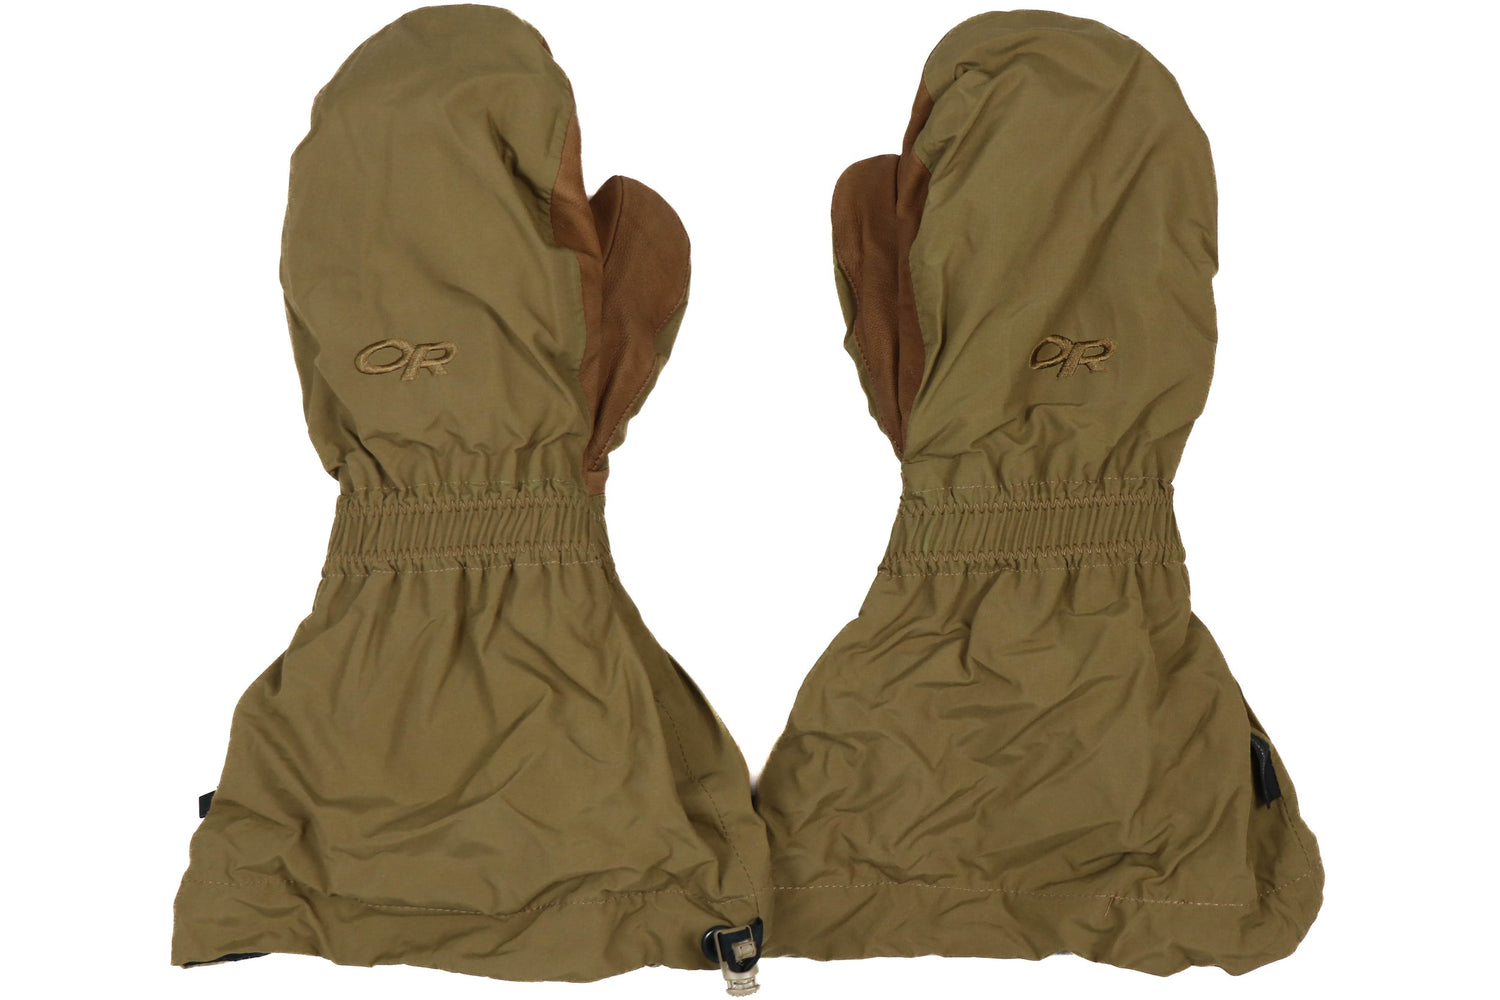 USMC Happy Suit Outdoor Research Extreme Cold Weather Mittens with Liner